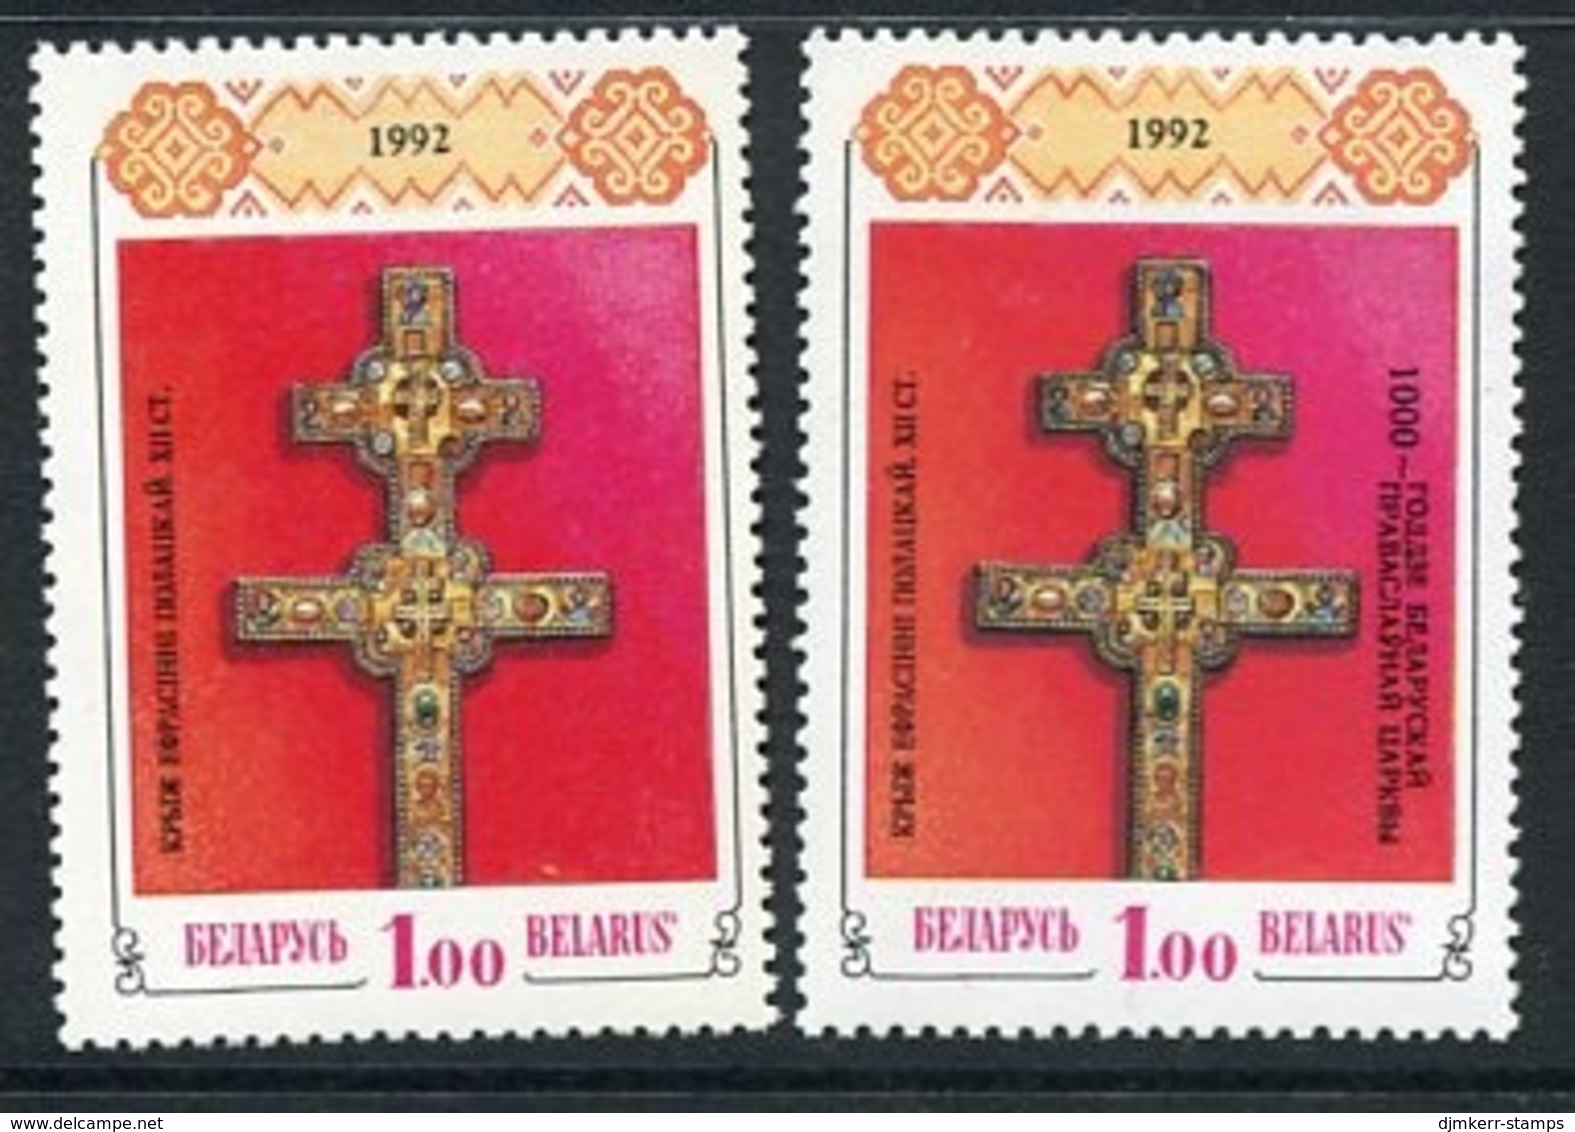 BELARUS 1992 Cross Of Poltsk With And Without Overprint, MNH / **  .  Michel 1, 6 - Wit-Rusland